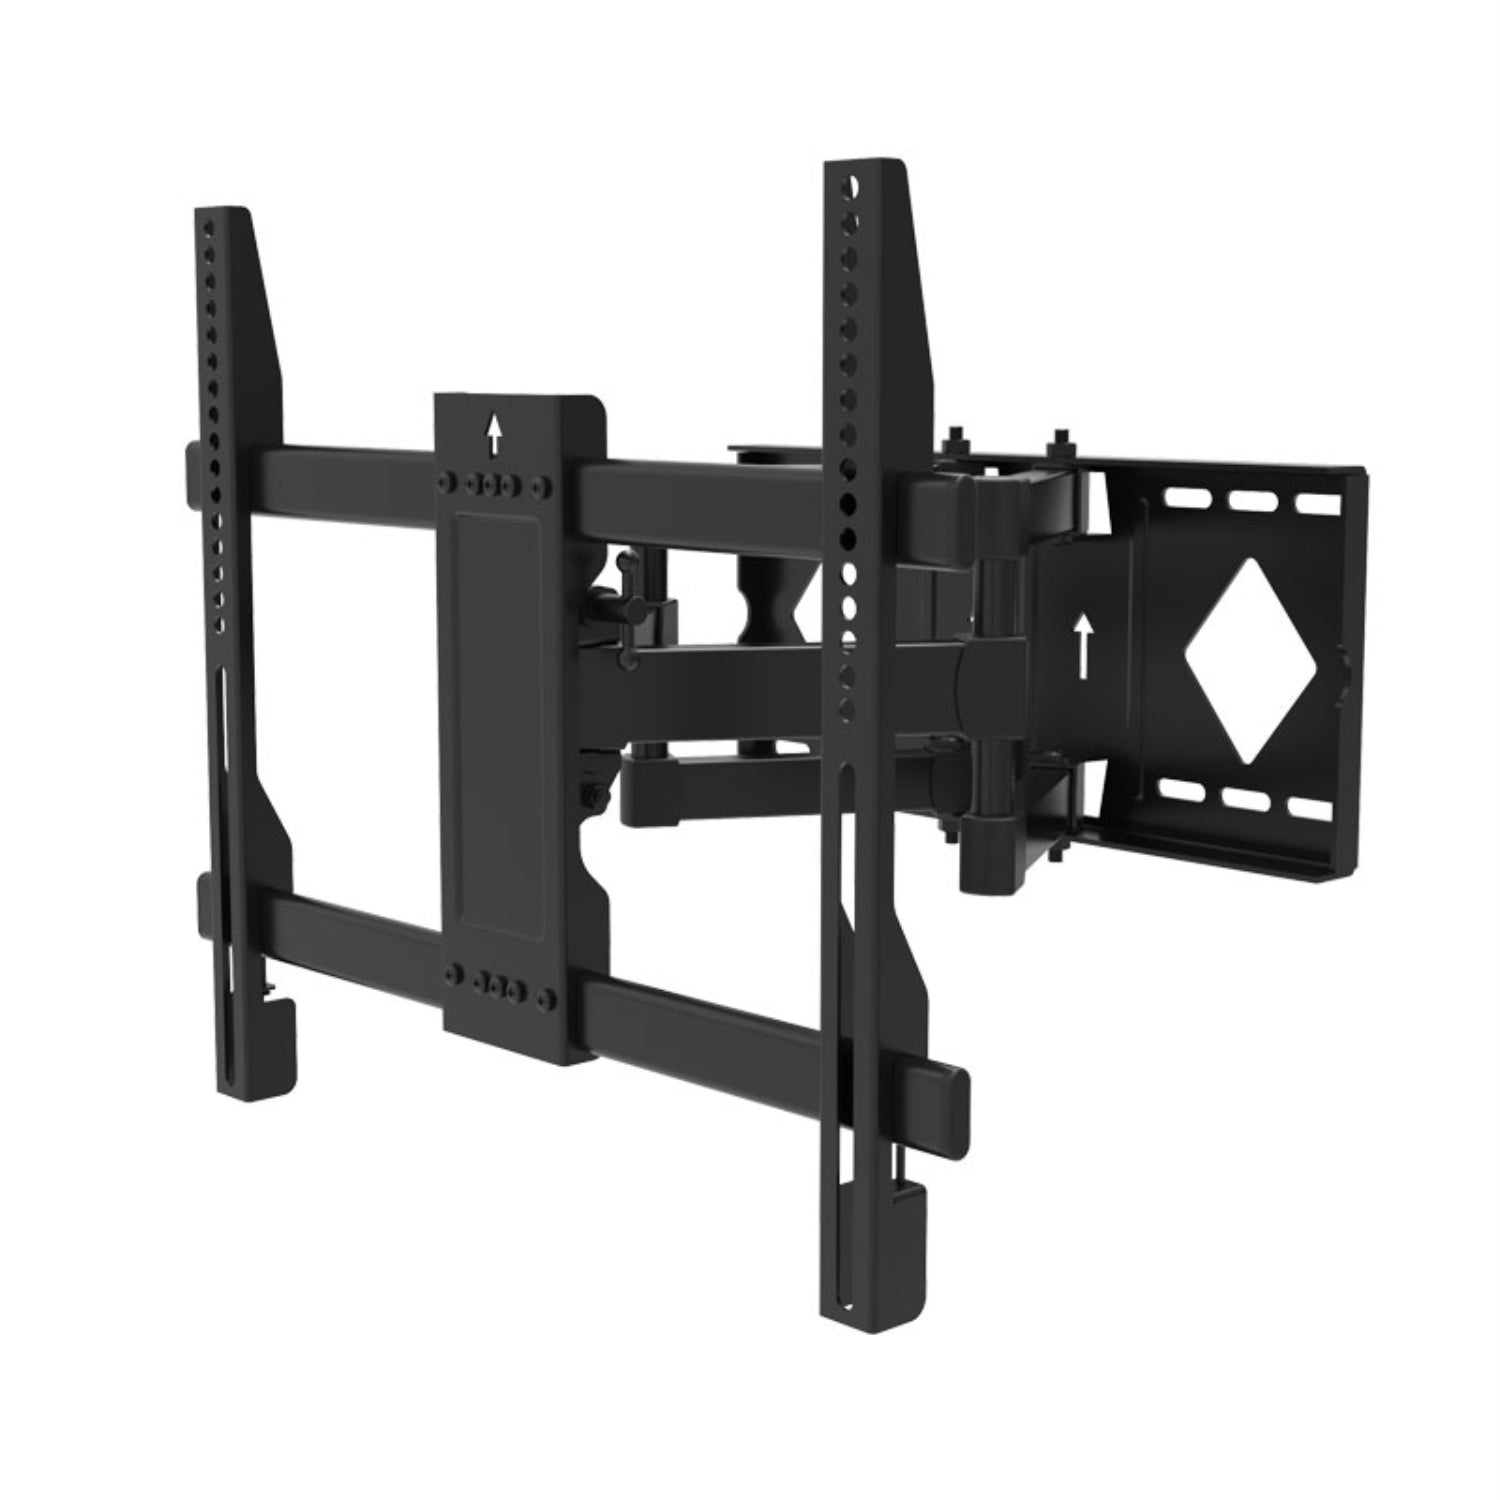 ViscoLogic Clench Adjustable Articulating TV Wall Mount Suitable for 32" - 65" TV's, VESA 100 x 100, 150 x 150, 200 x 100, 200 x 200, 400 x 200, 400x400, 600 x 400